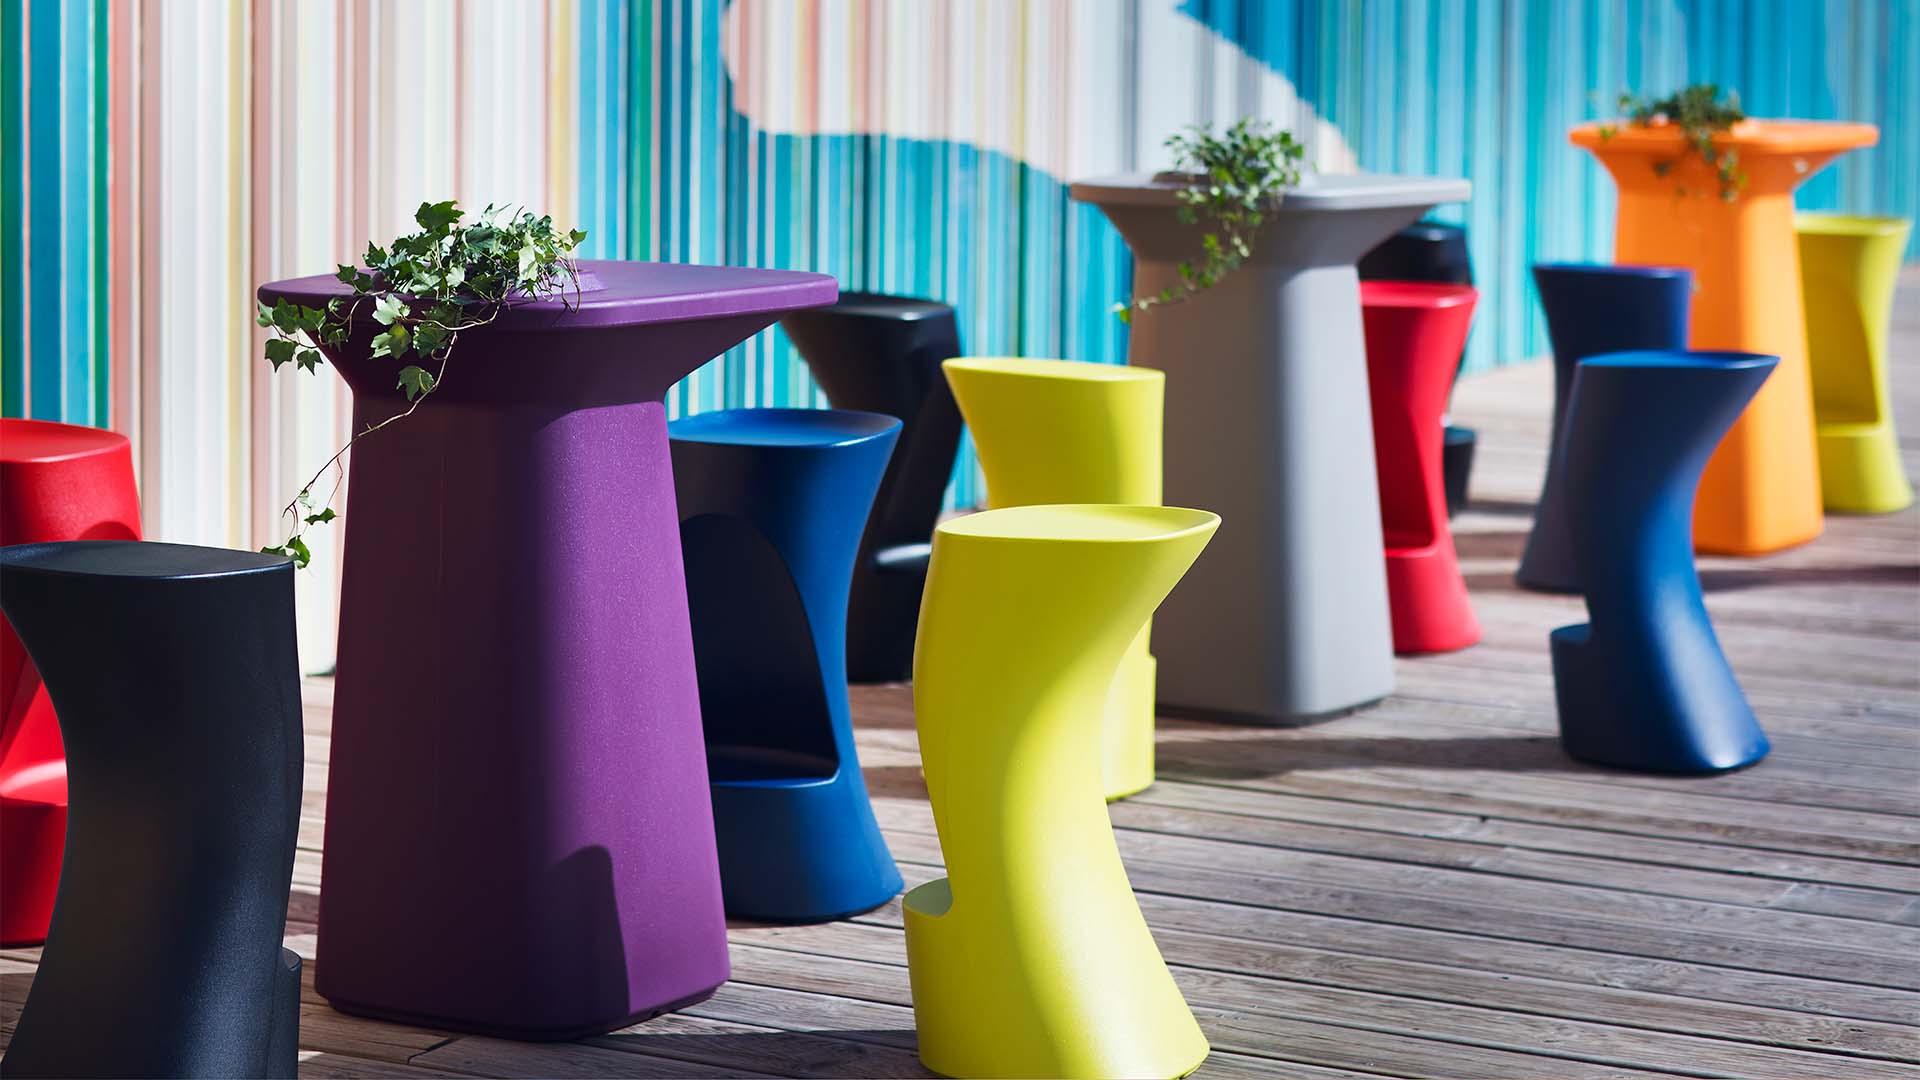 Noma outdoor stools and planters by Javier Mariscal Vondom